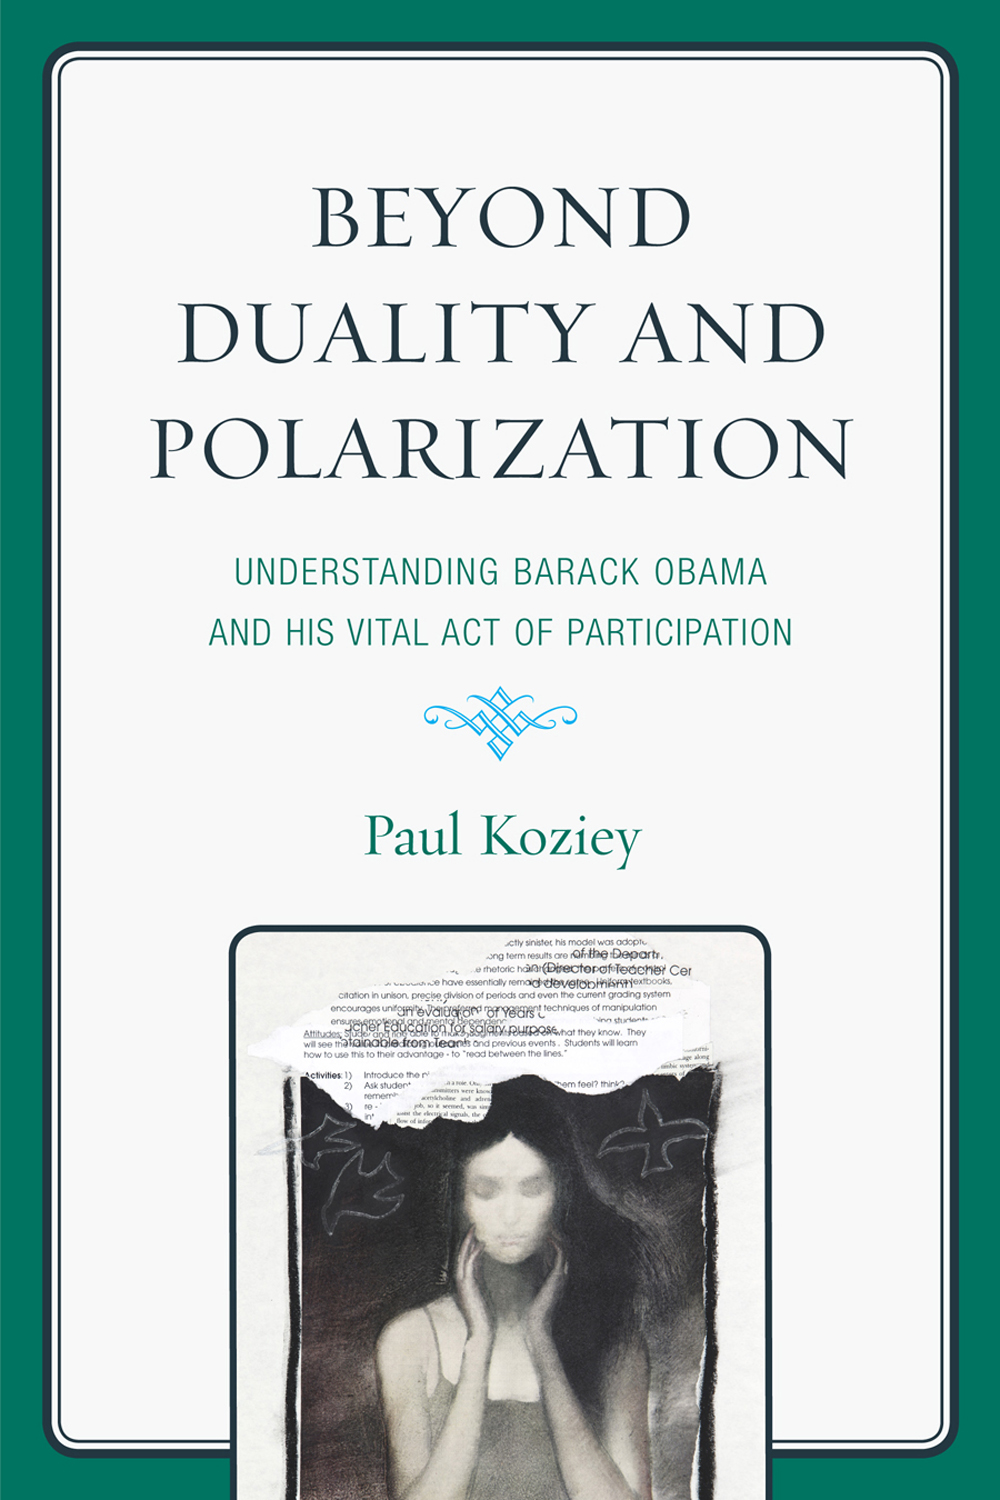 Beyond Duality and Polarization: Understanding Barack Obama and His Vital Act of Participation